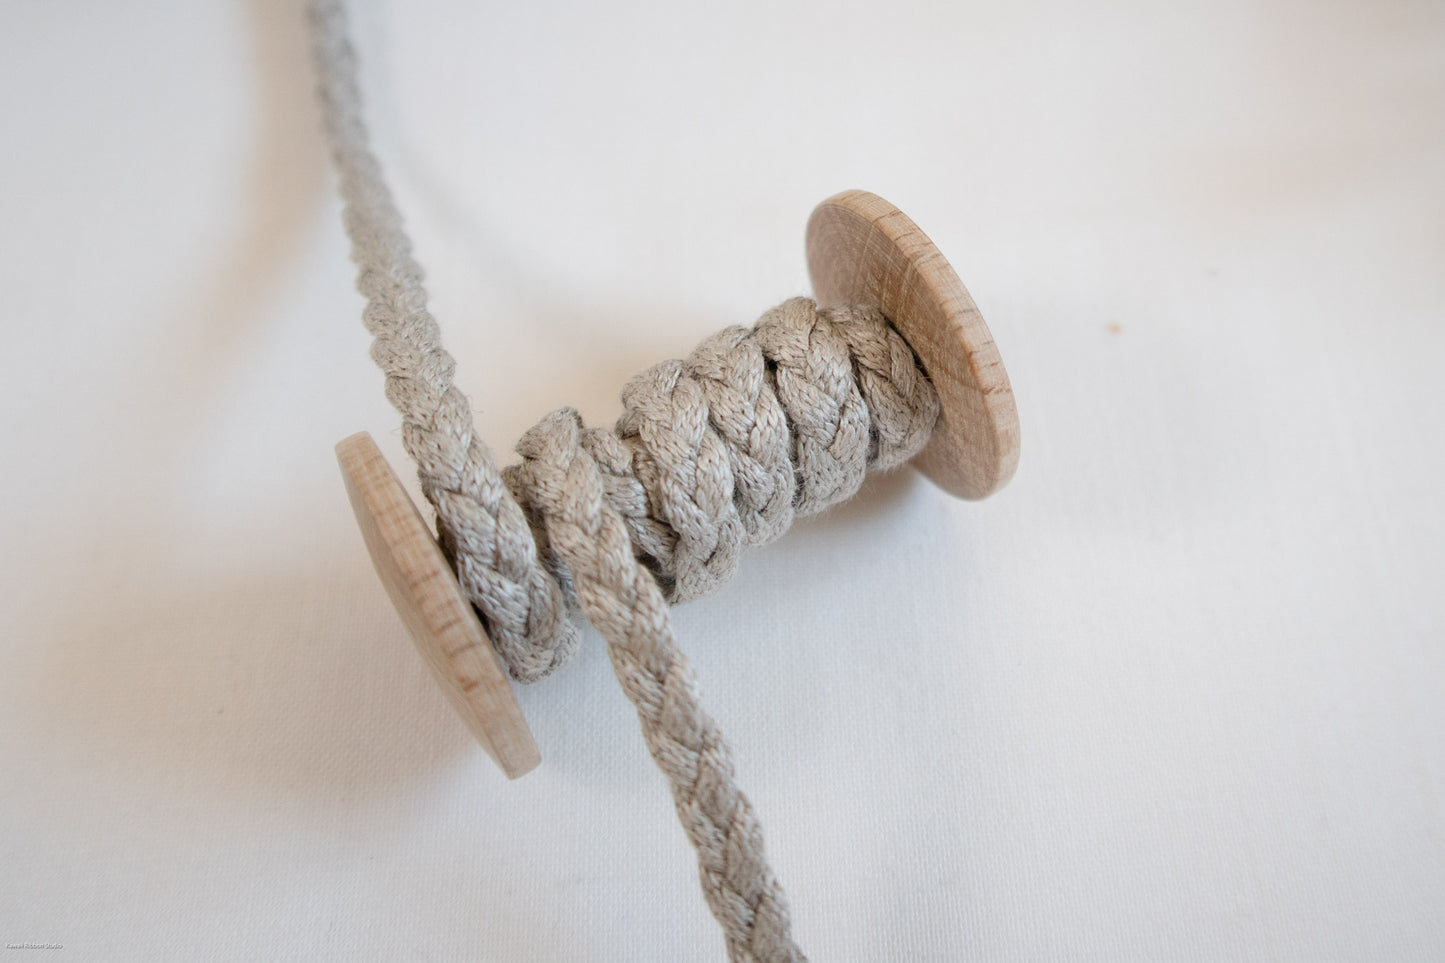 4mm braided cord in 100% washed linen